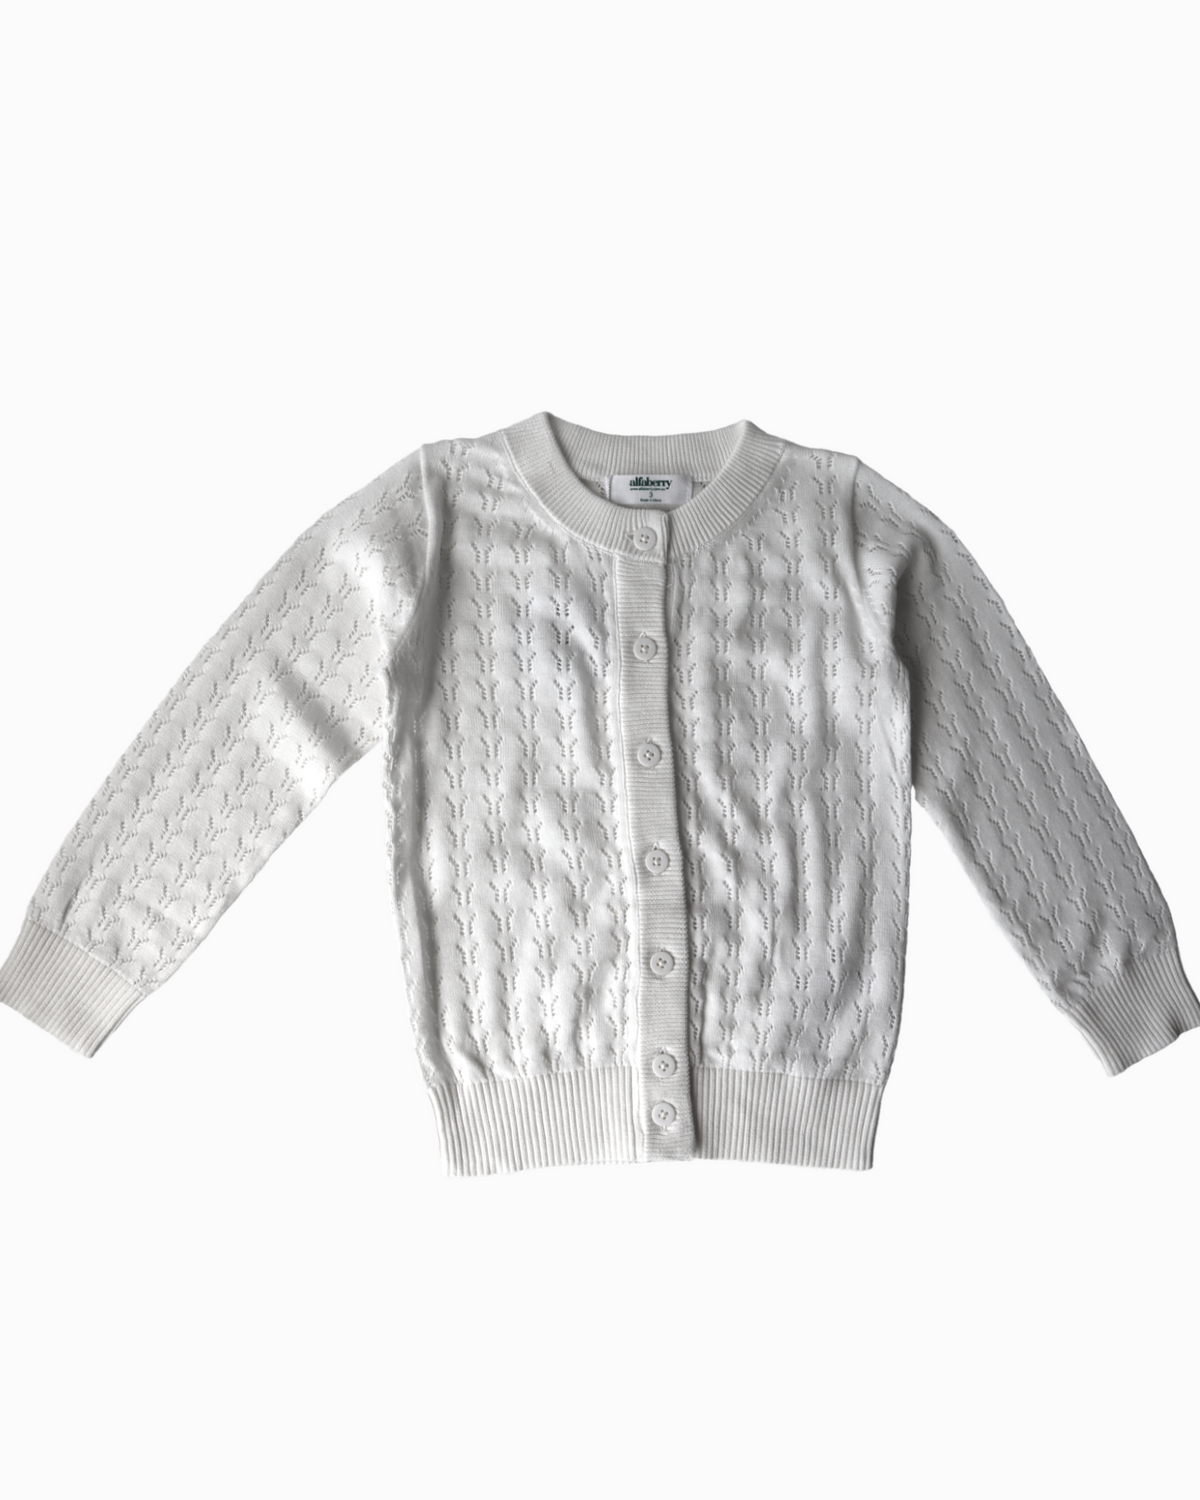 Classic Pointelle Girls Cardigan in Ivory